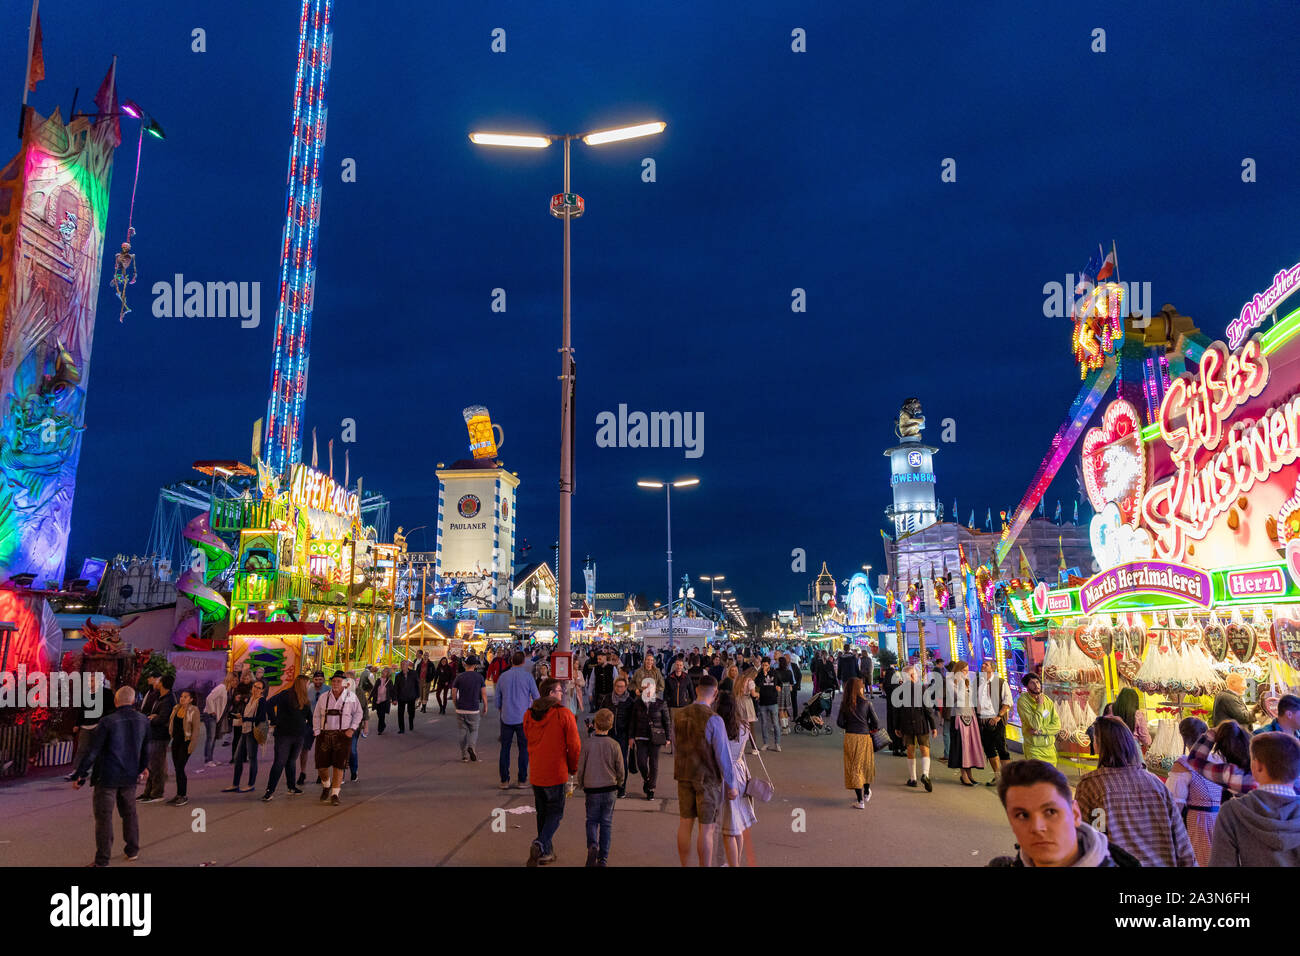 Munich, Germany - September 24: visitors, beertents and fairground rides on the oktoberfest in munich at night. Stock Photo